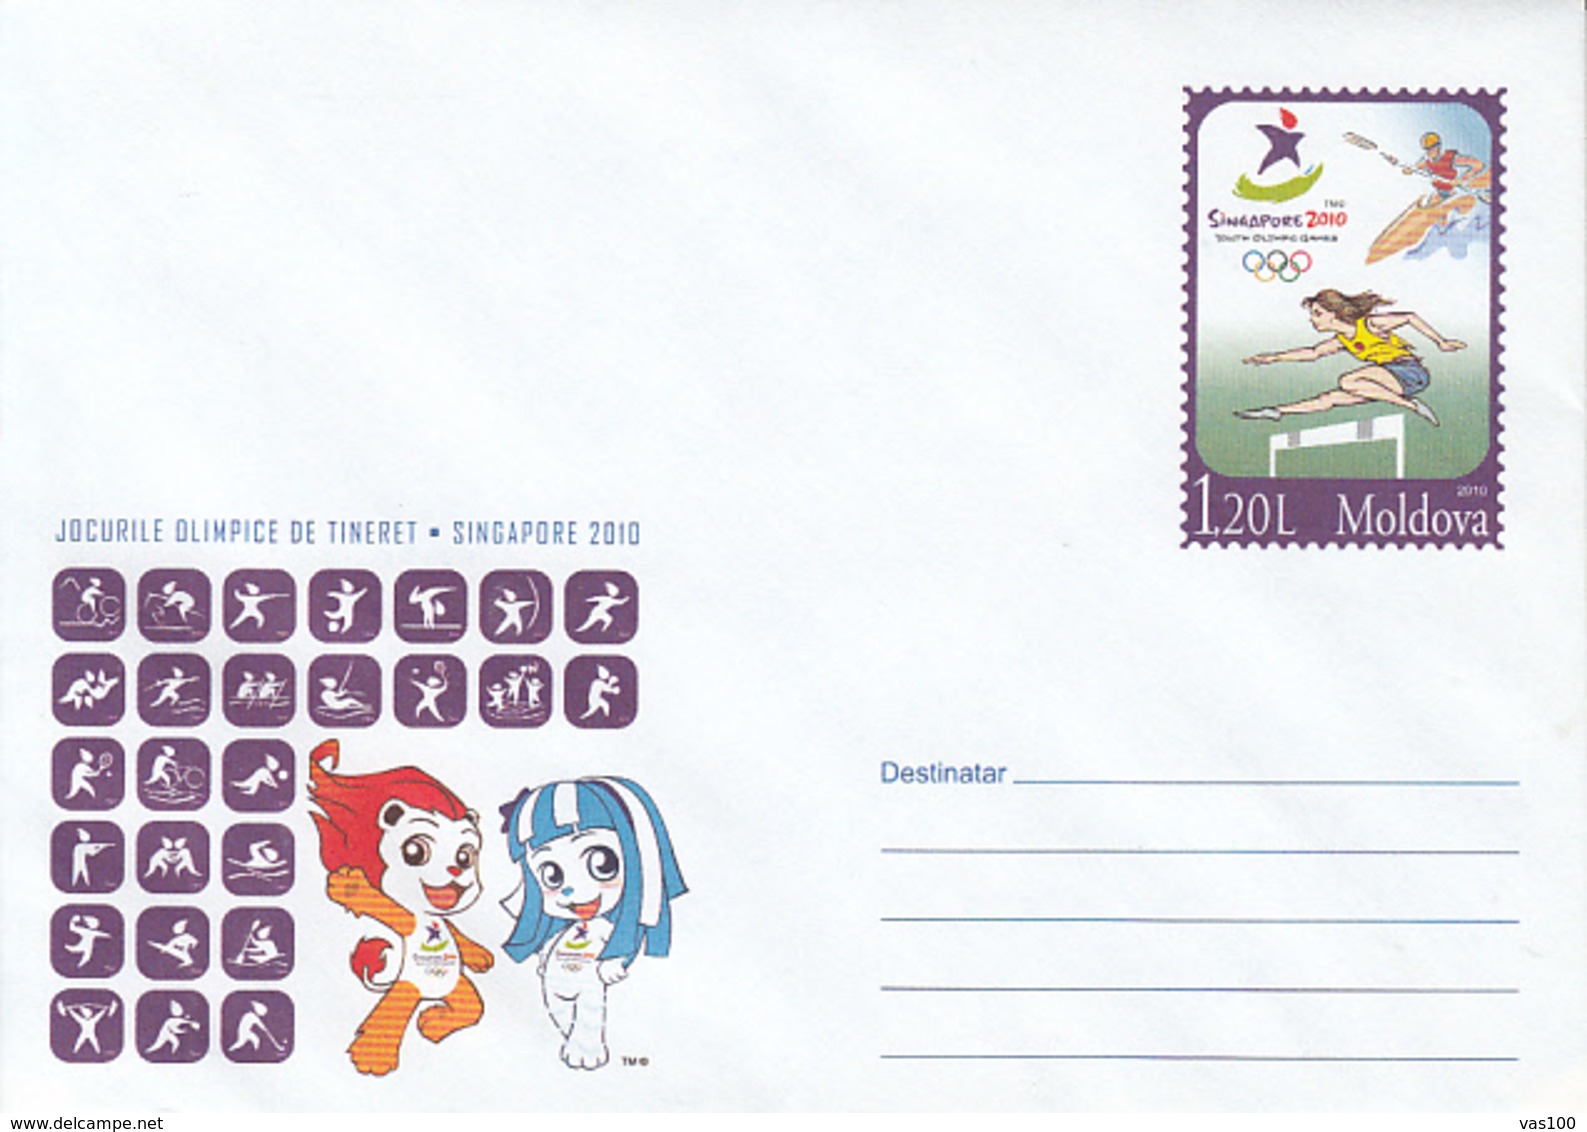 OLYMPIC GAMES, SINGAPORE'10 YOUTH OLYMPICS, COVER STATIONERY, ENTIER POSTAL, 2010, MOLDOVA - Sommer 2014 : Singapur (Olympische Jugendspiele)